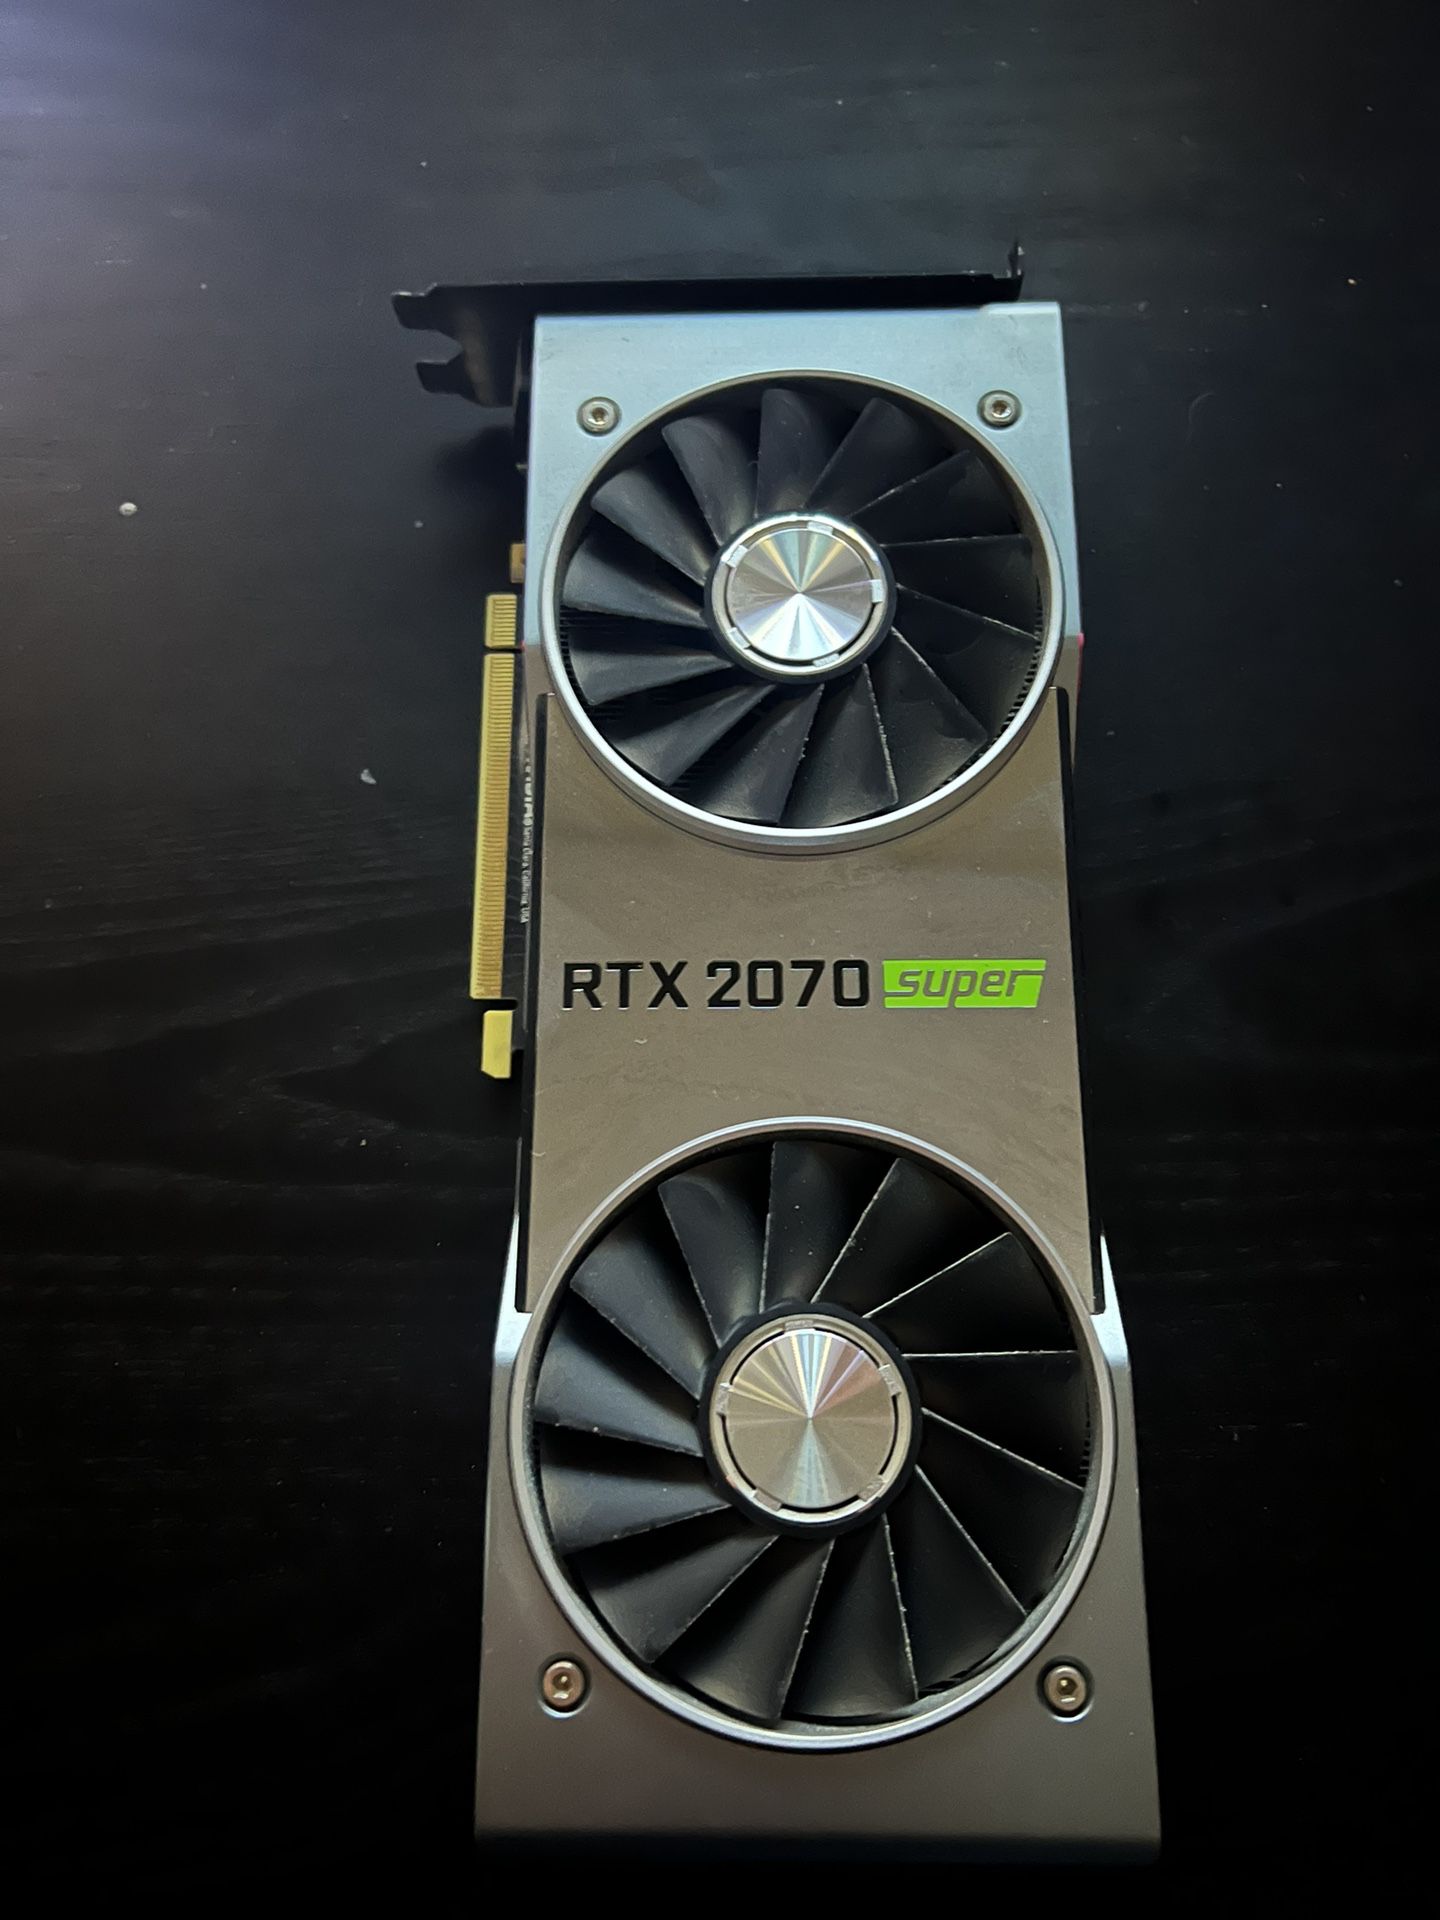 NVIDIA GeForce RTX 2070 Super Founders Edition 